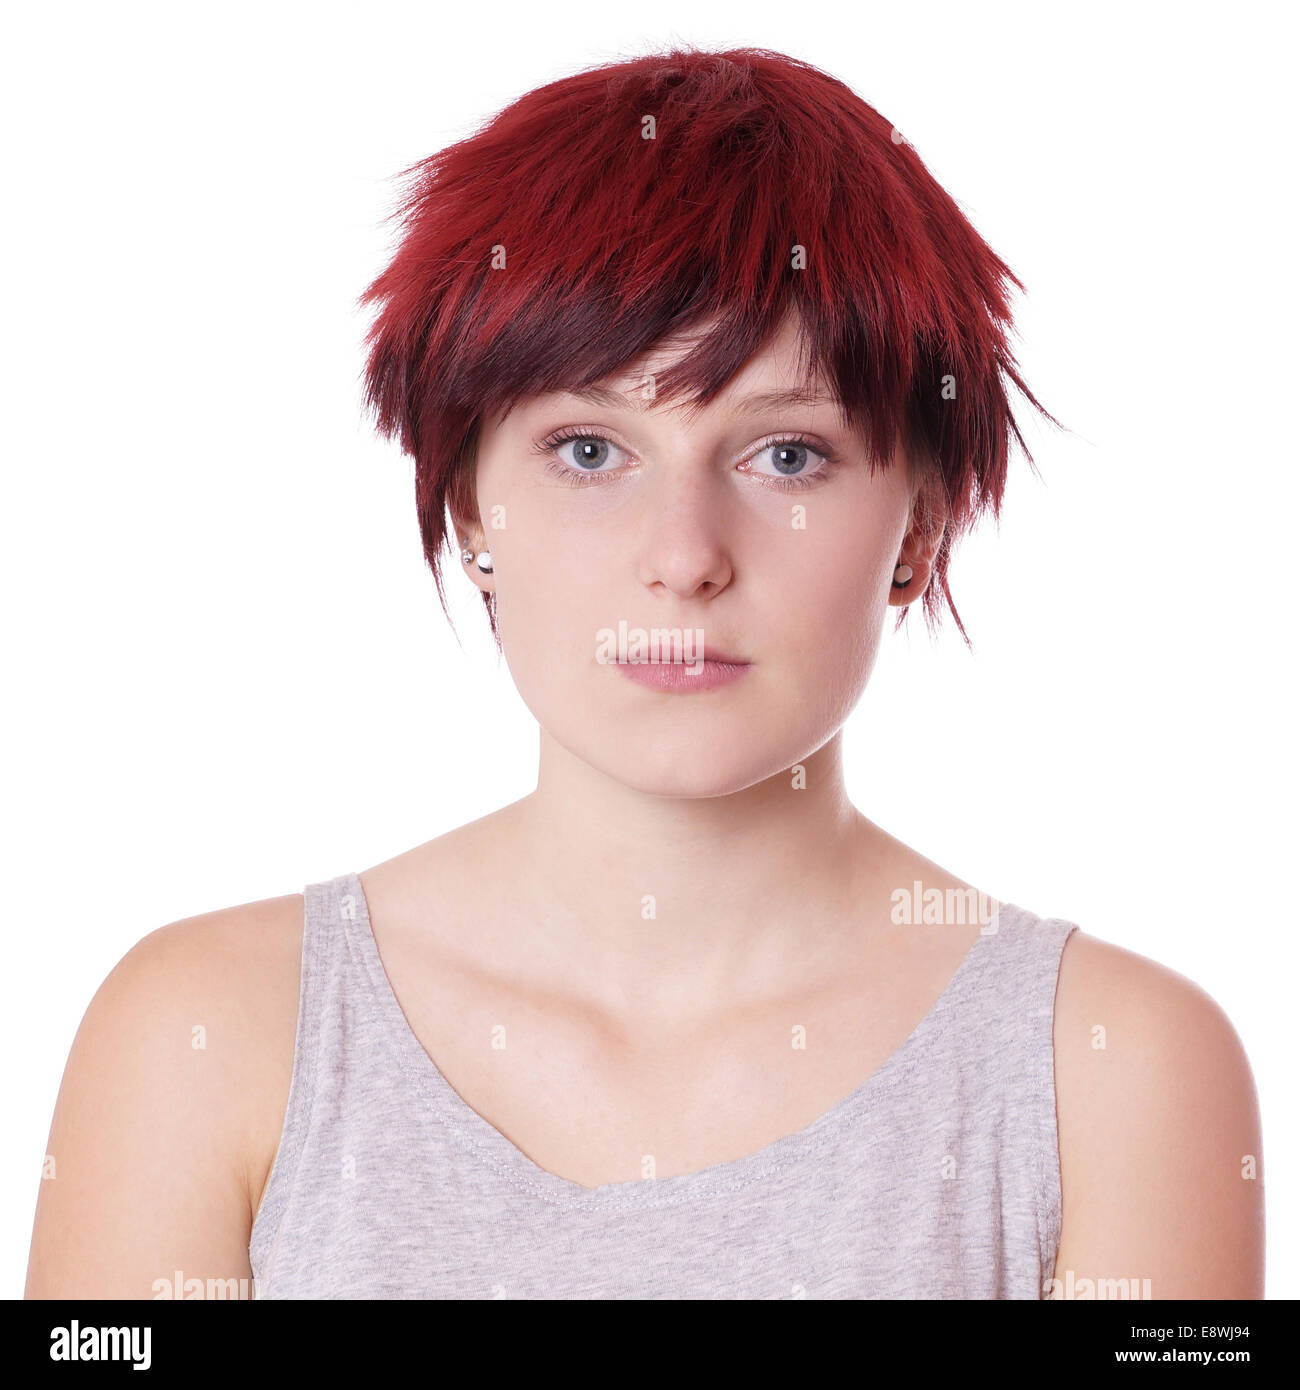 young woman with short red hair Stock Photo